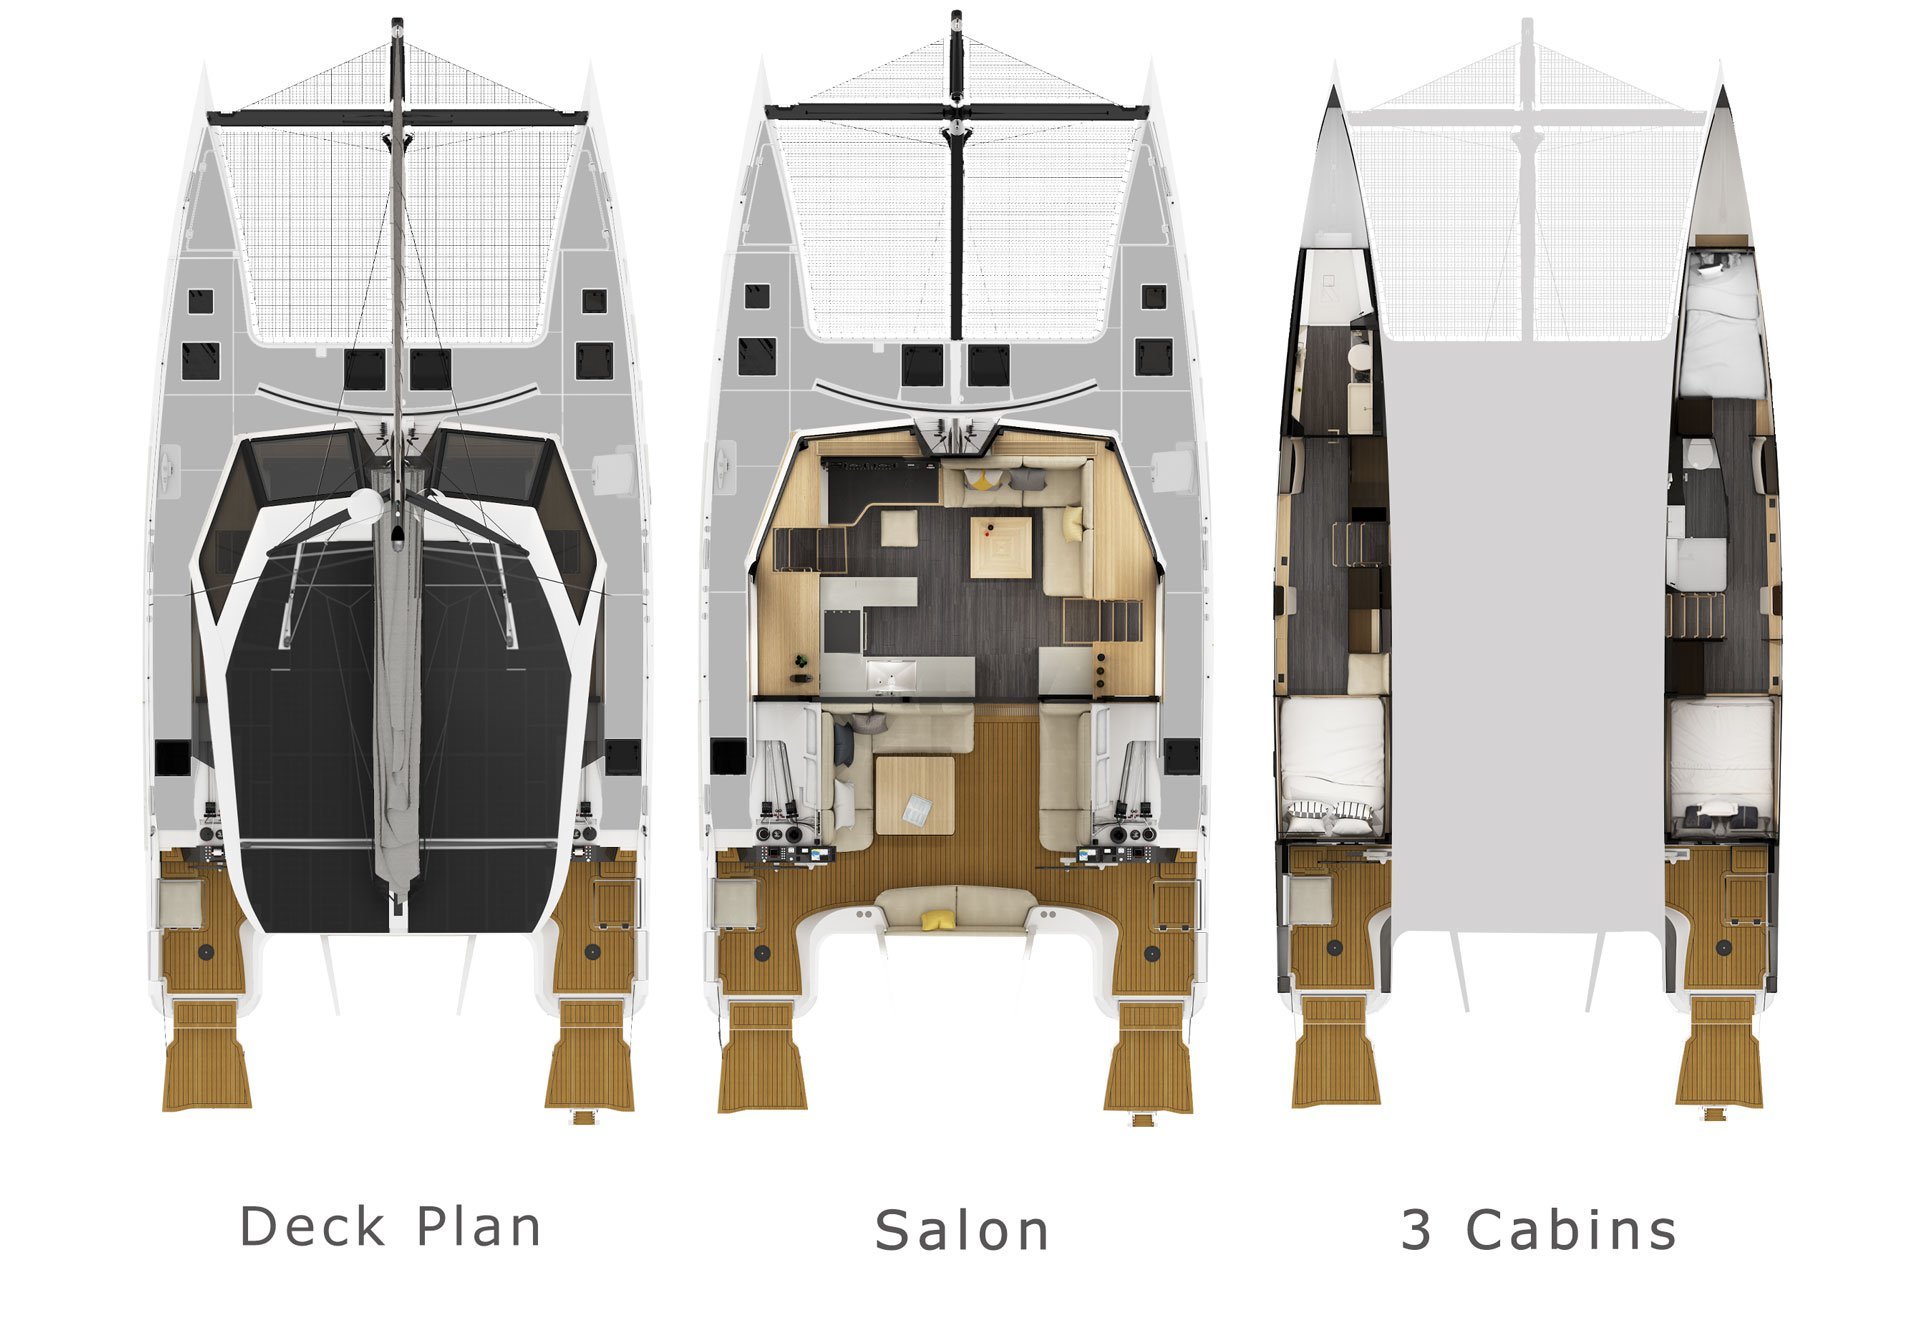 General arrangements with deck plan and interior spaces